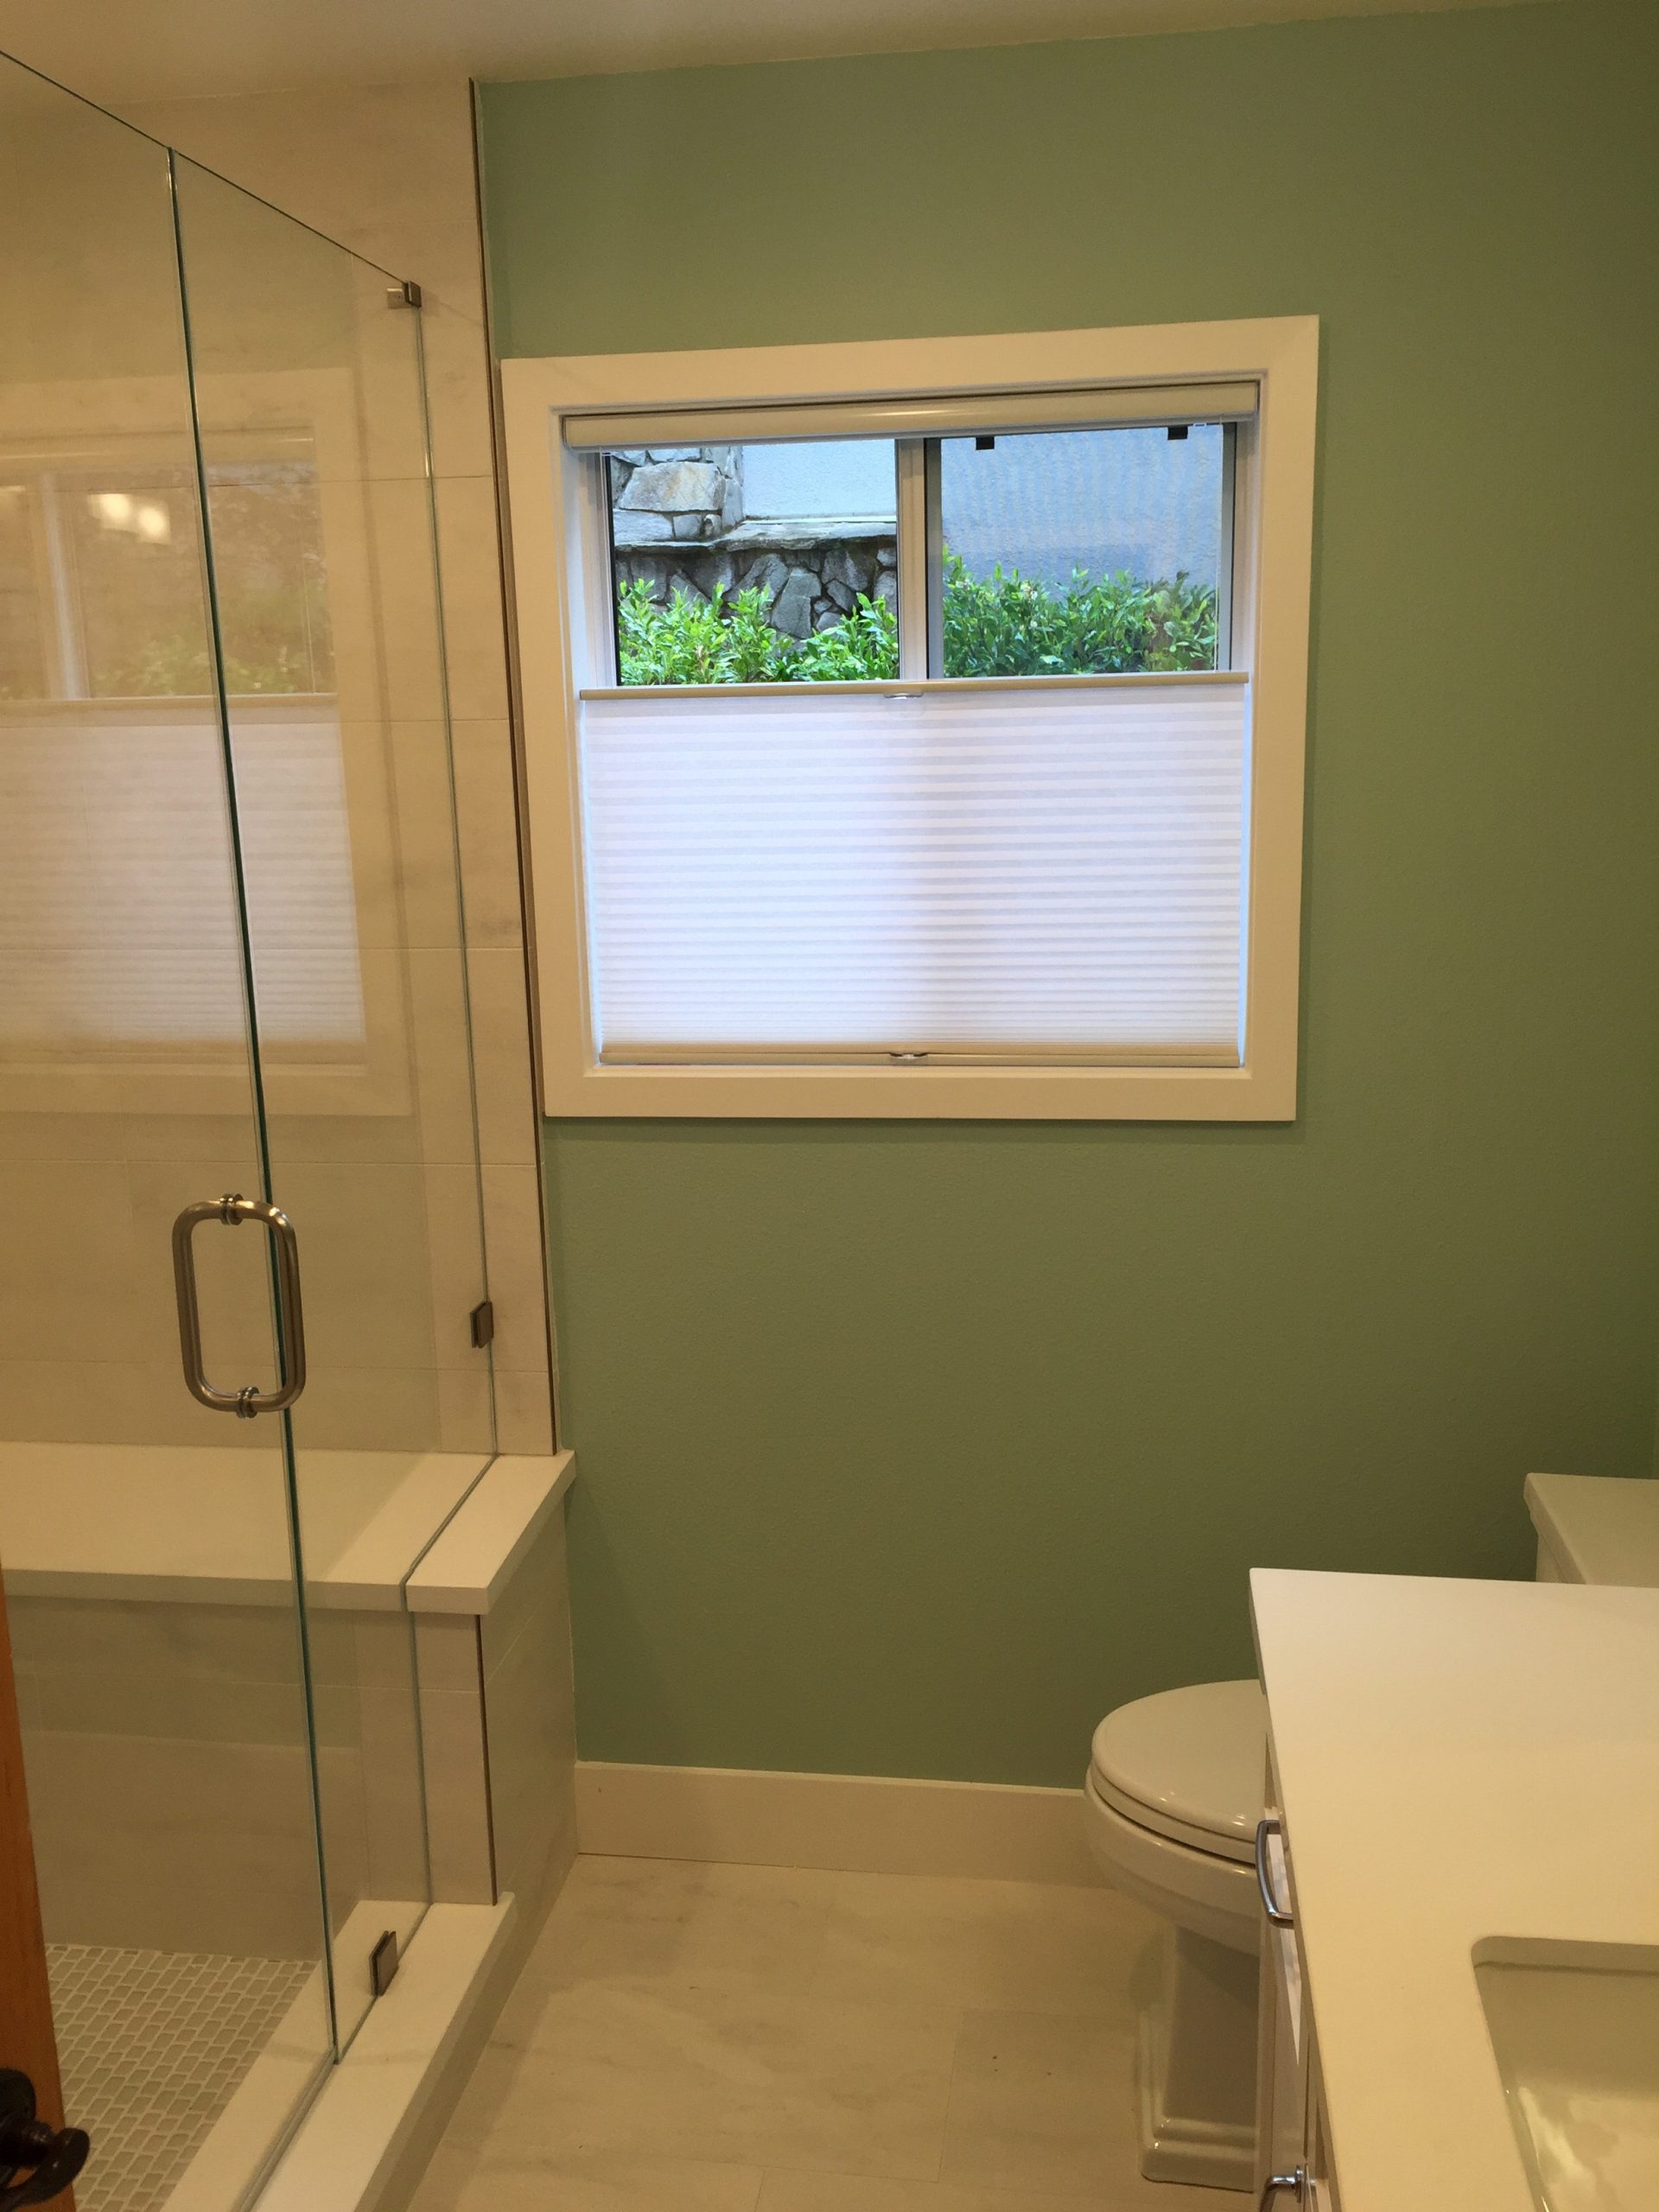 Outdated guest bathroom gets a fresh look